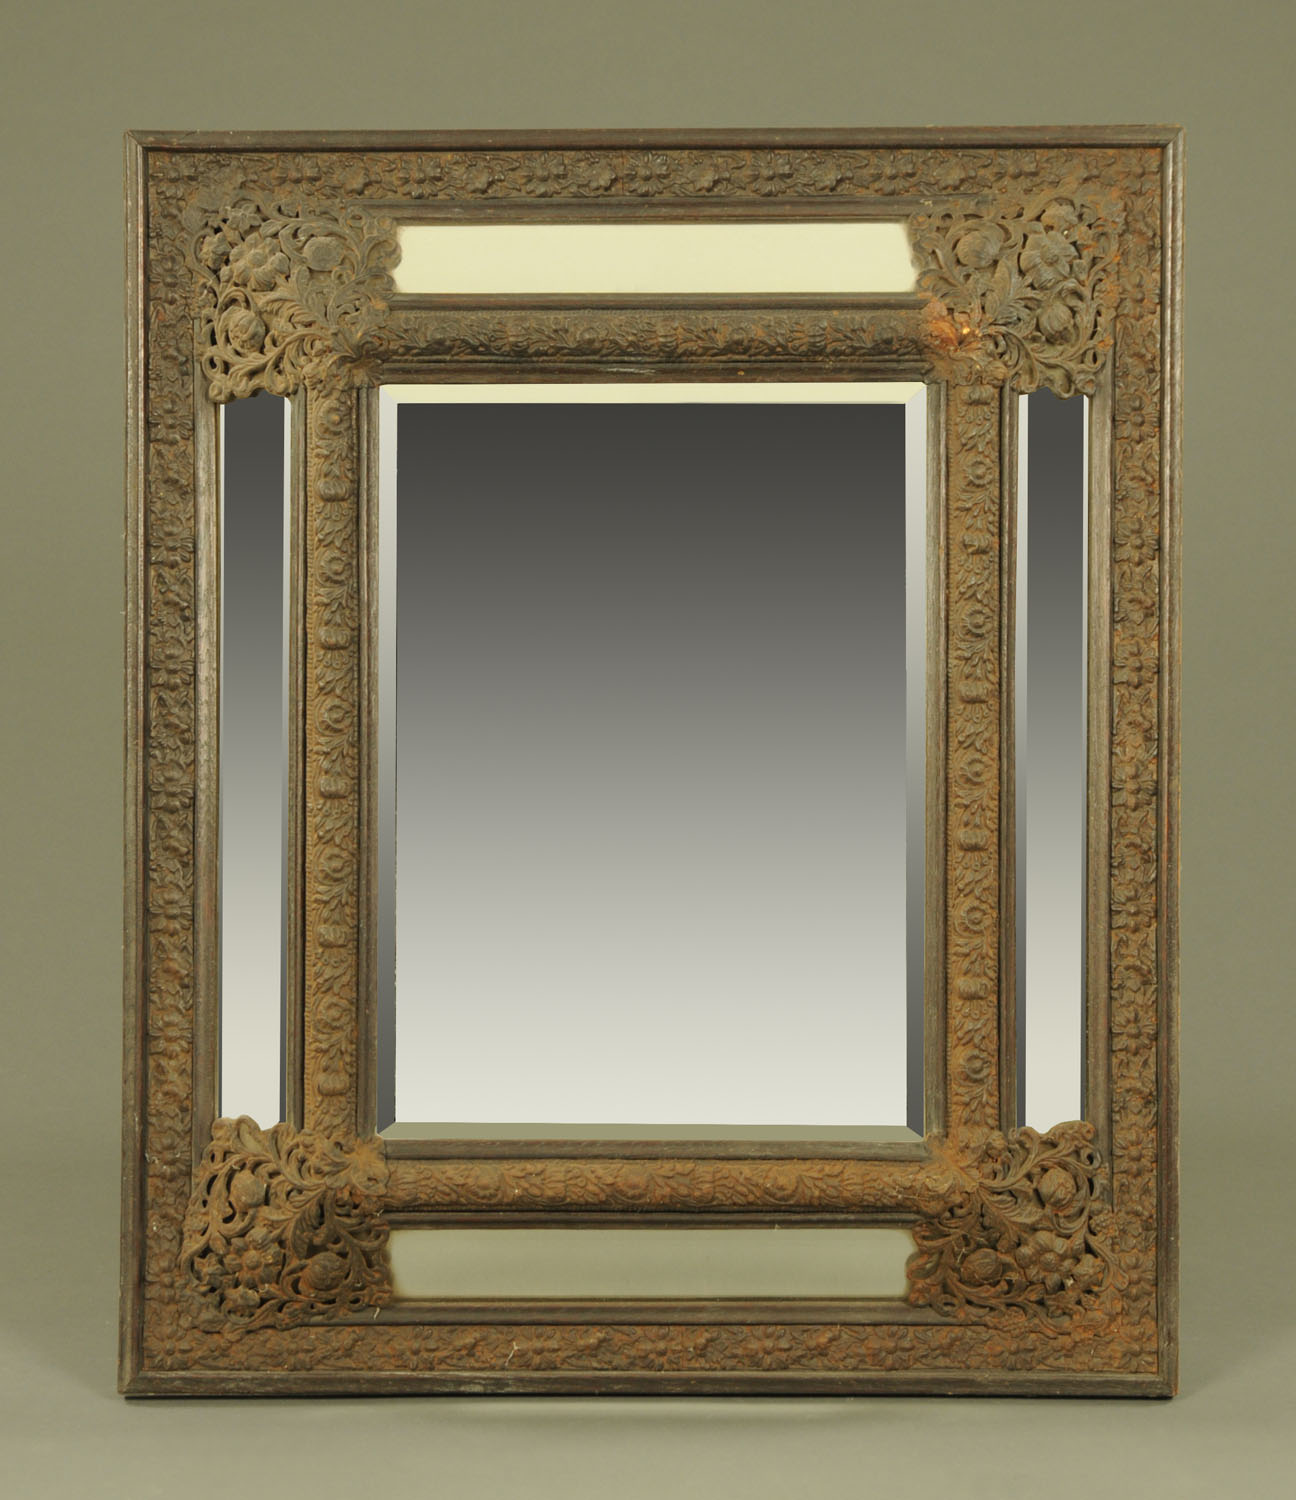 A 19th century continental metal and oak framed cushion fronted mirror, with bevelled glass panels.